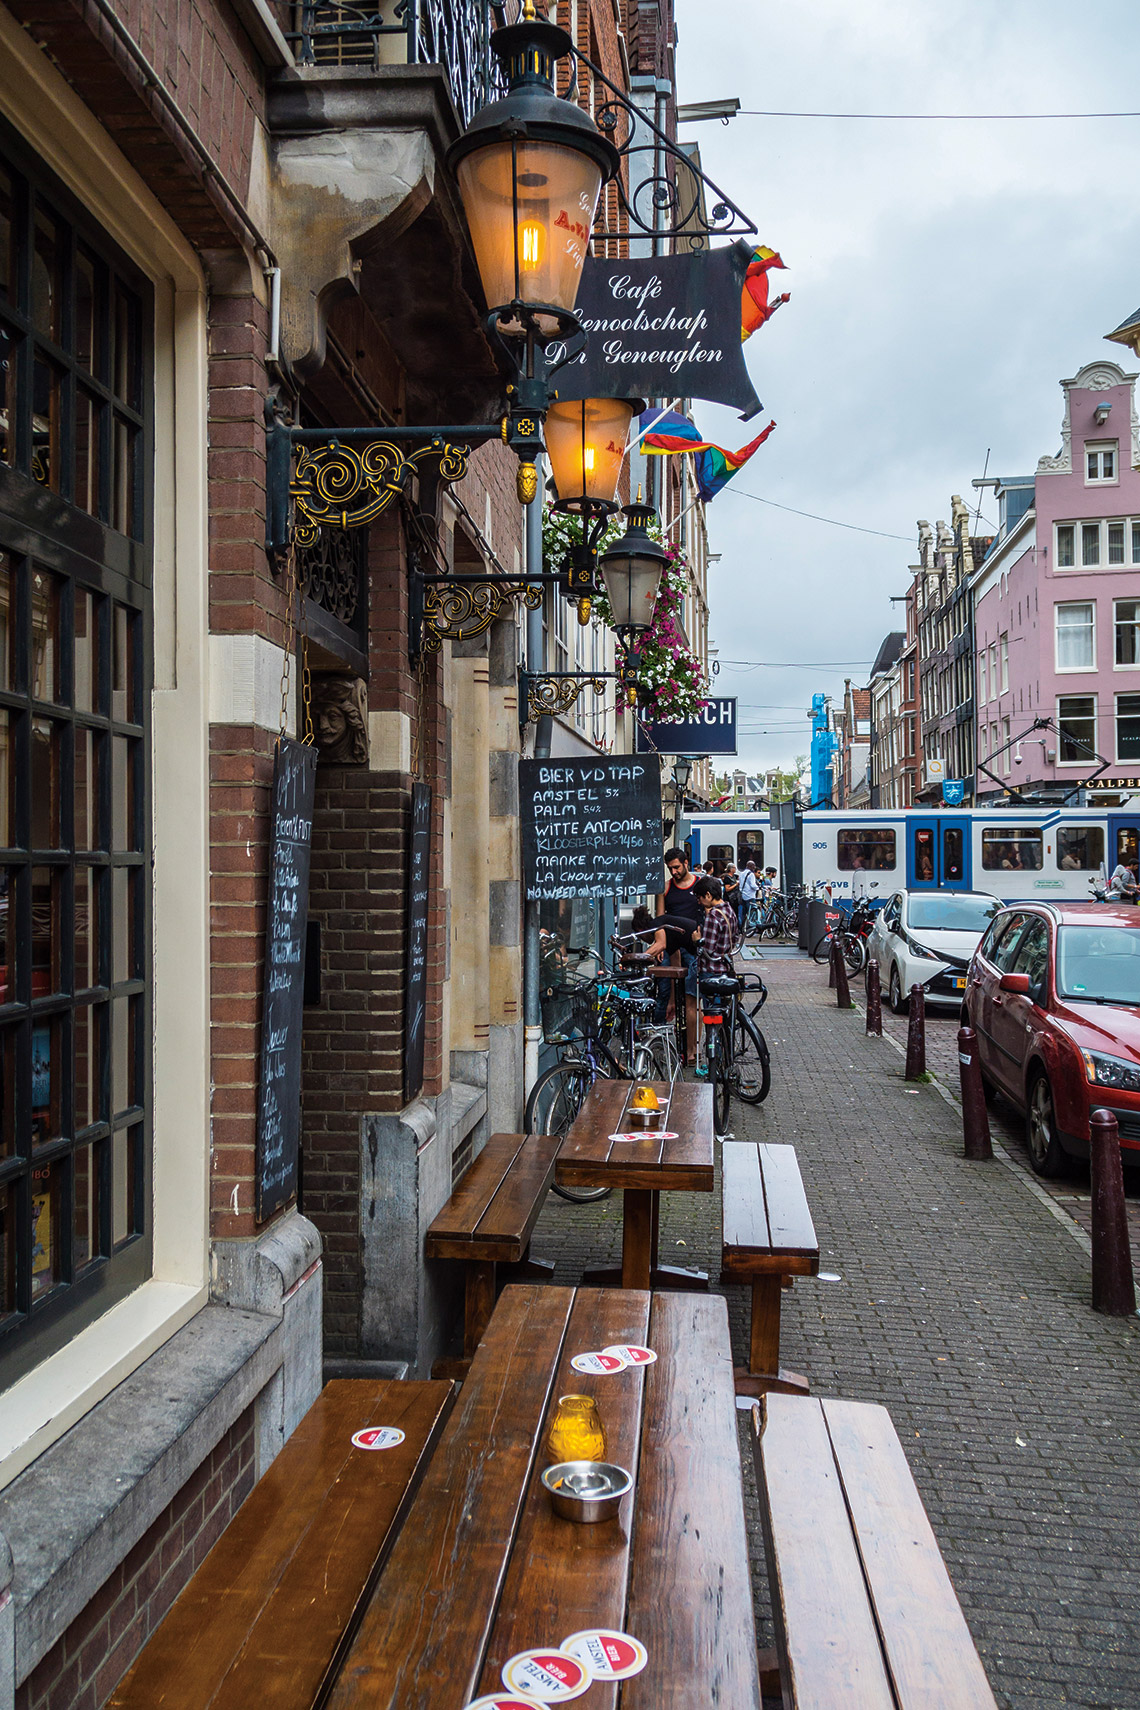 Bars in the streets of Amsterdam.Photography: 4kclips.